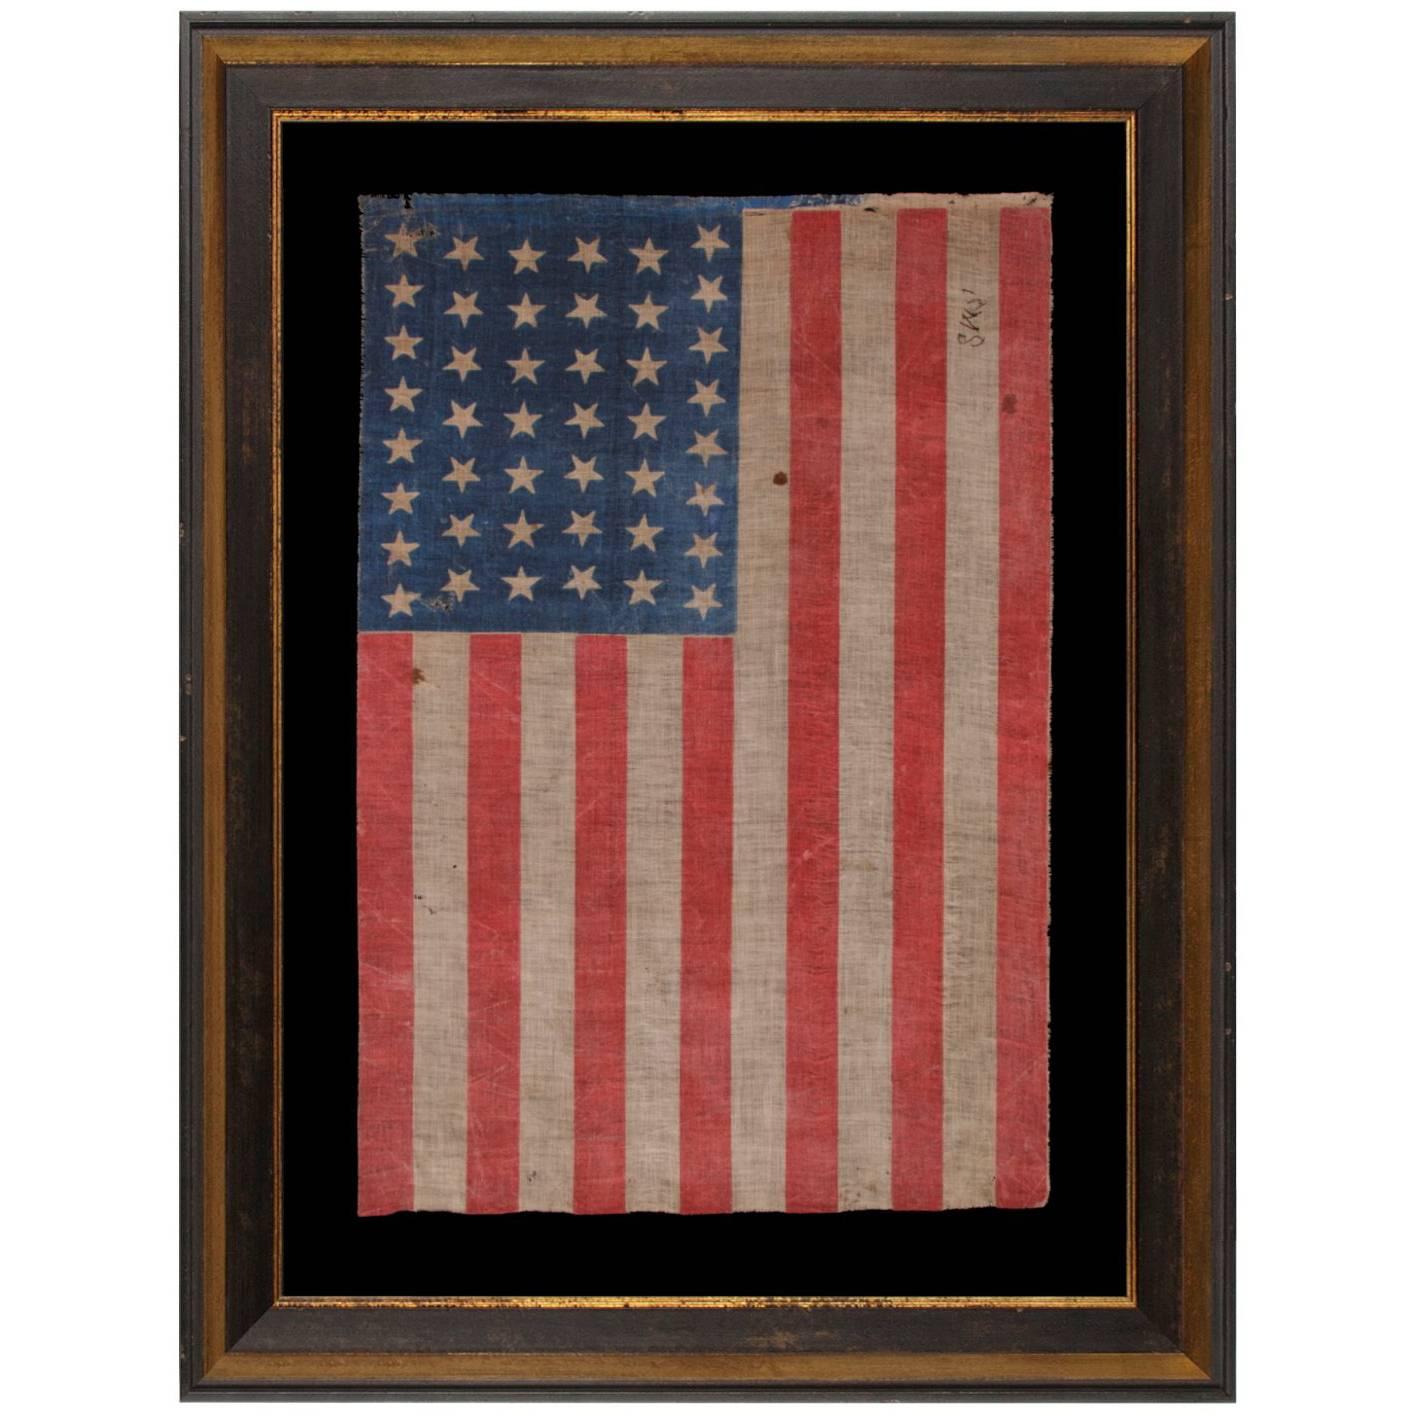 44 Stars in Dancing Rows in an Hourglass Formation, on an Antique American Flag